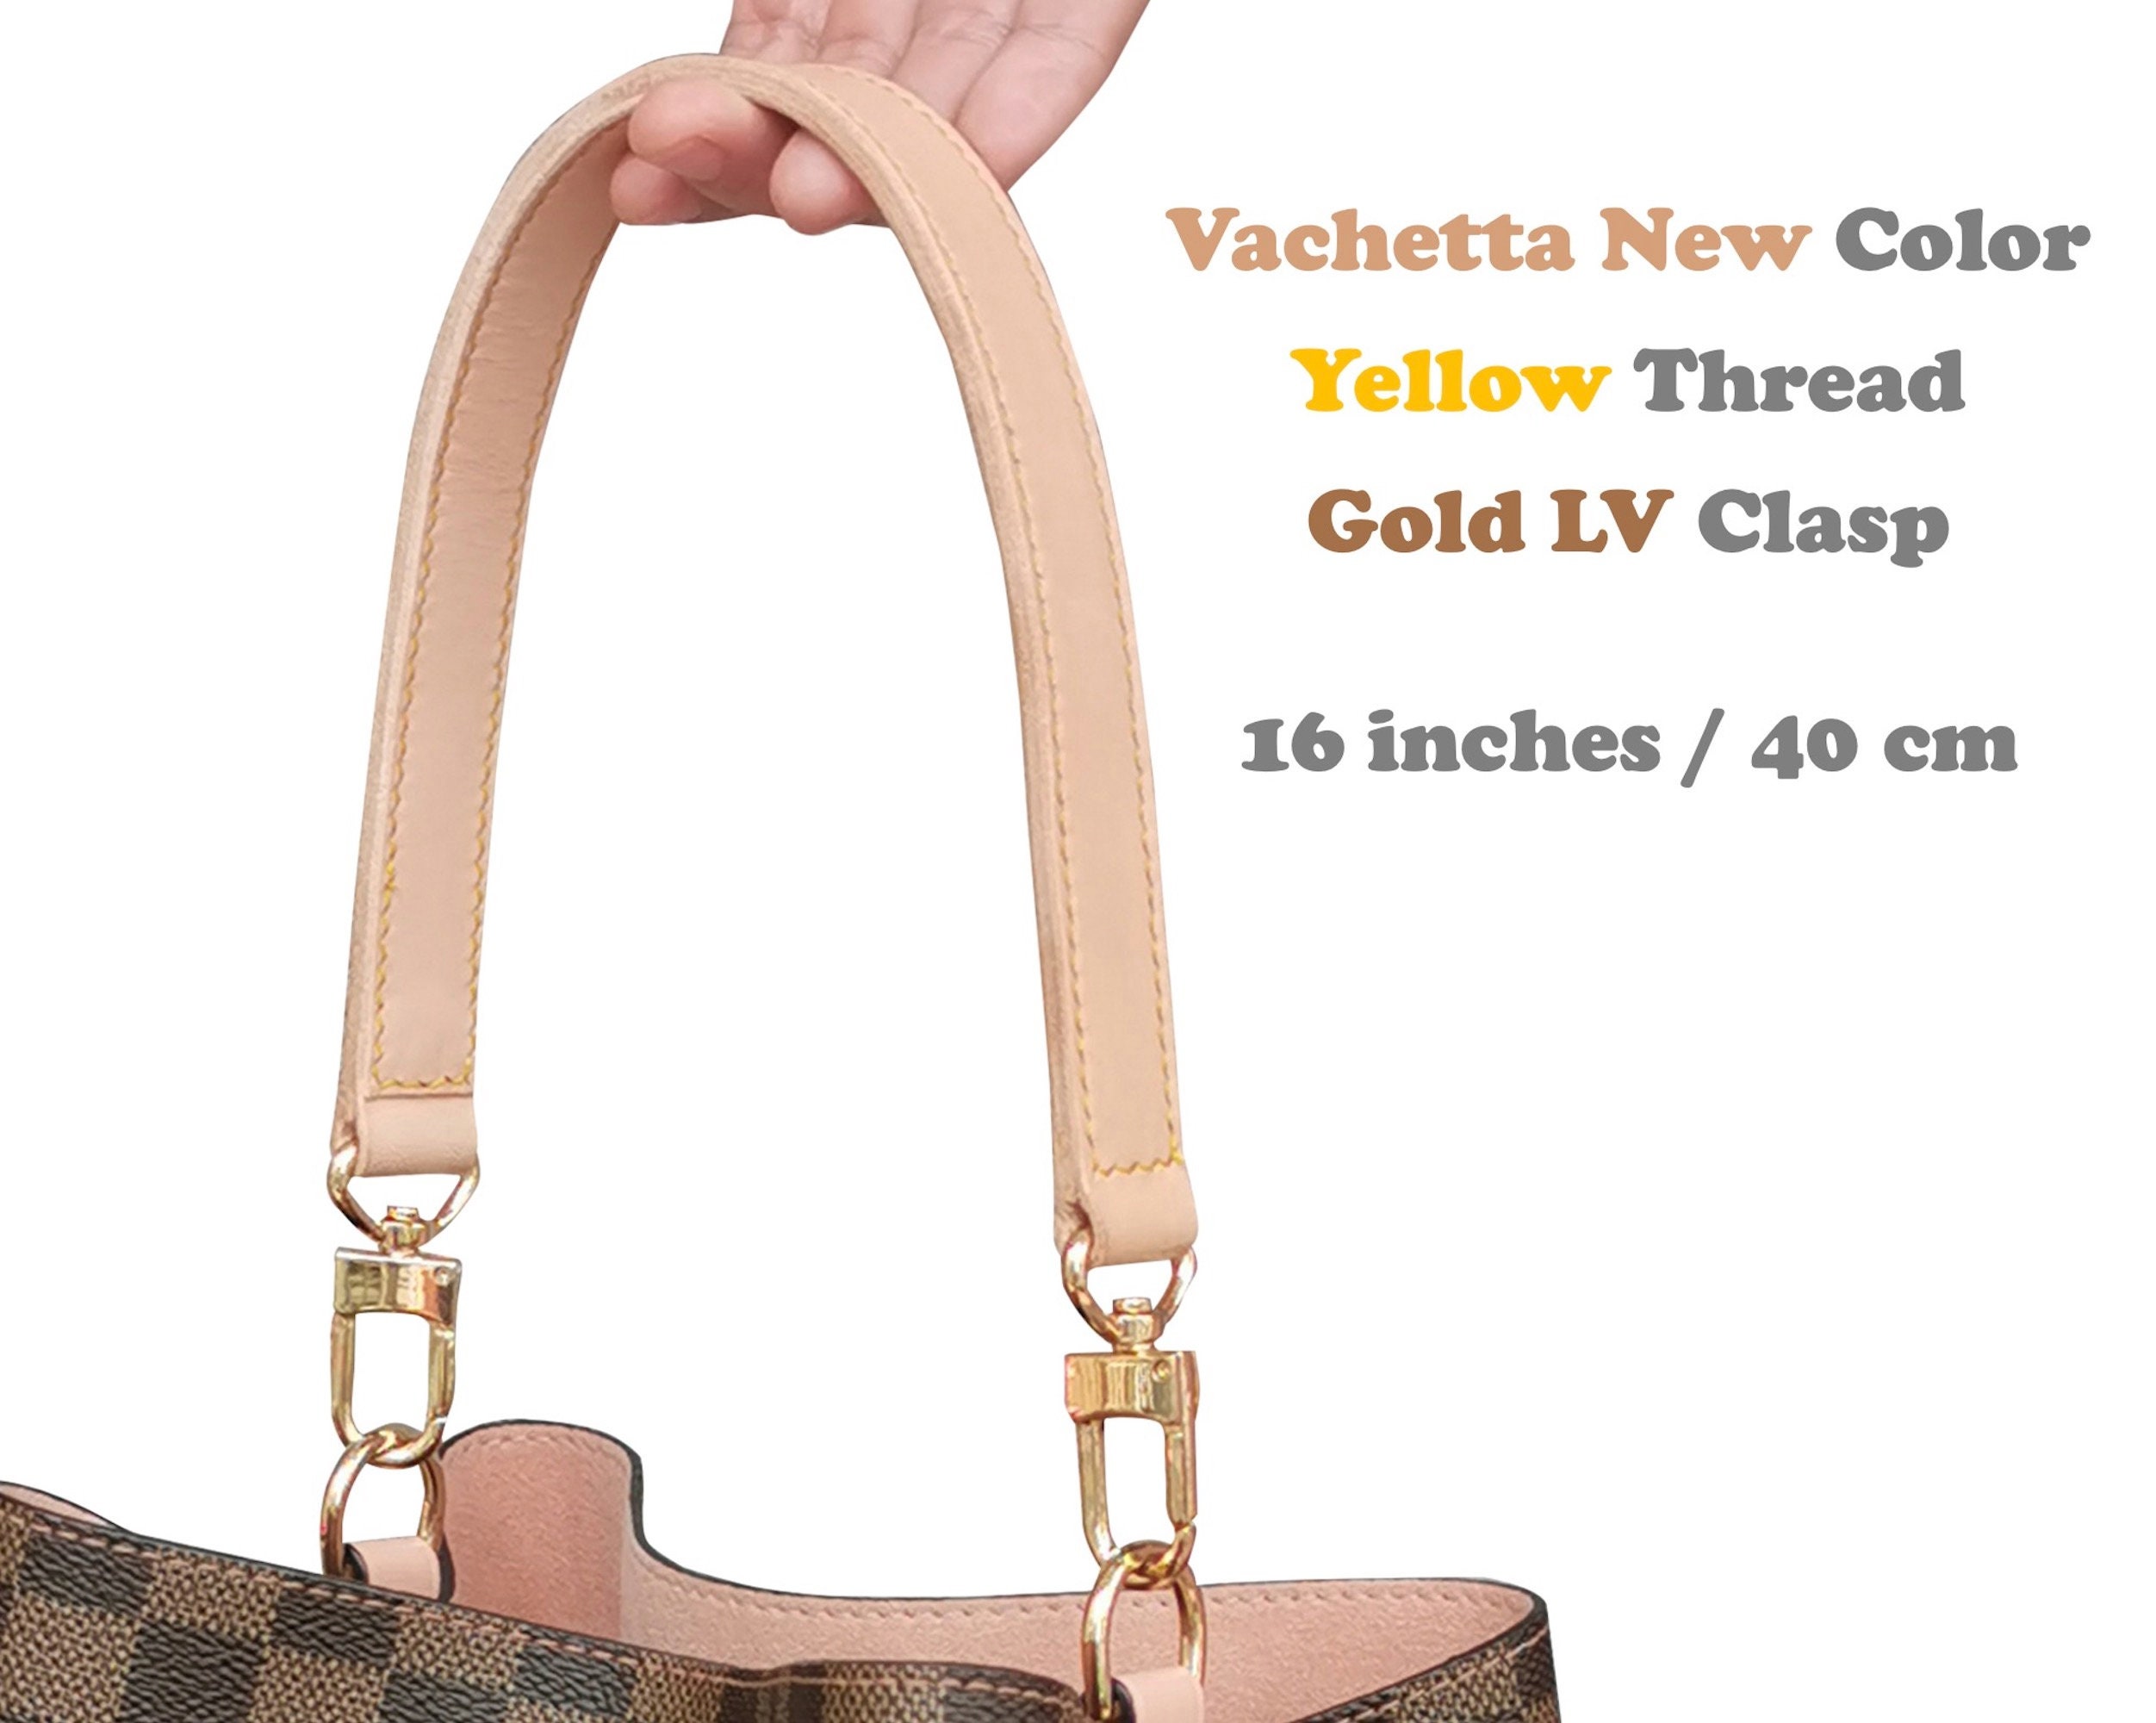 Braided Woven Handbag Strap for NeoNoe mm, Real Leather, Designer Tote, Top Handle Purse, Gold Silver Brass Clasps